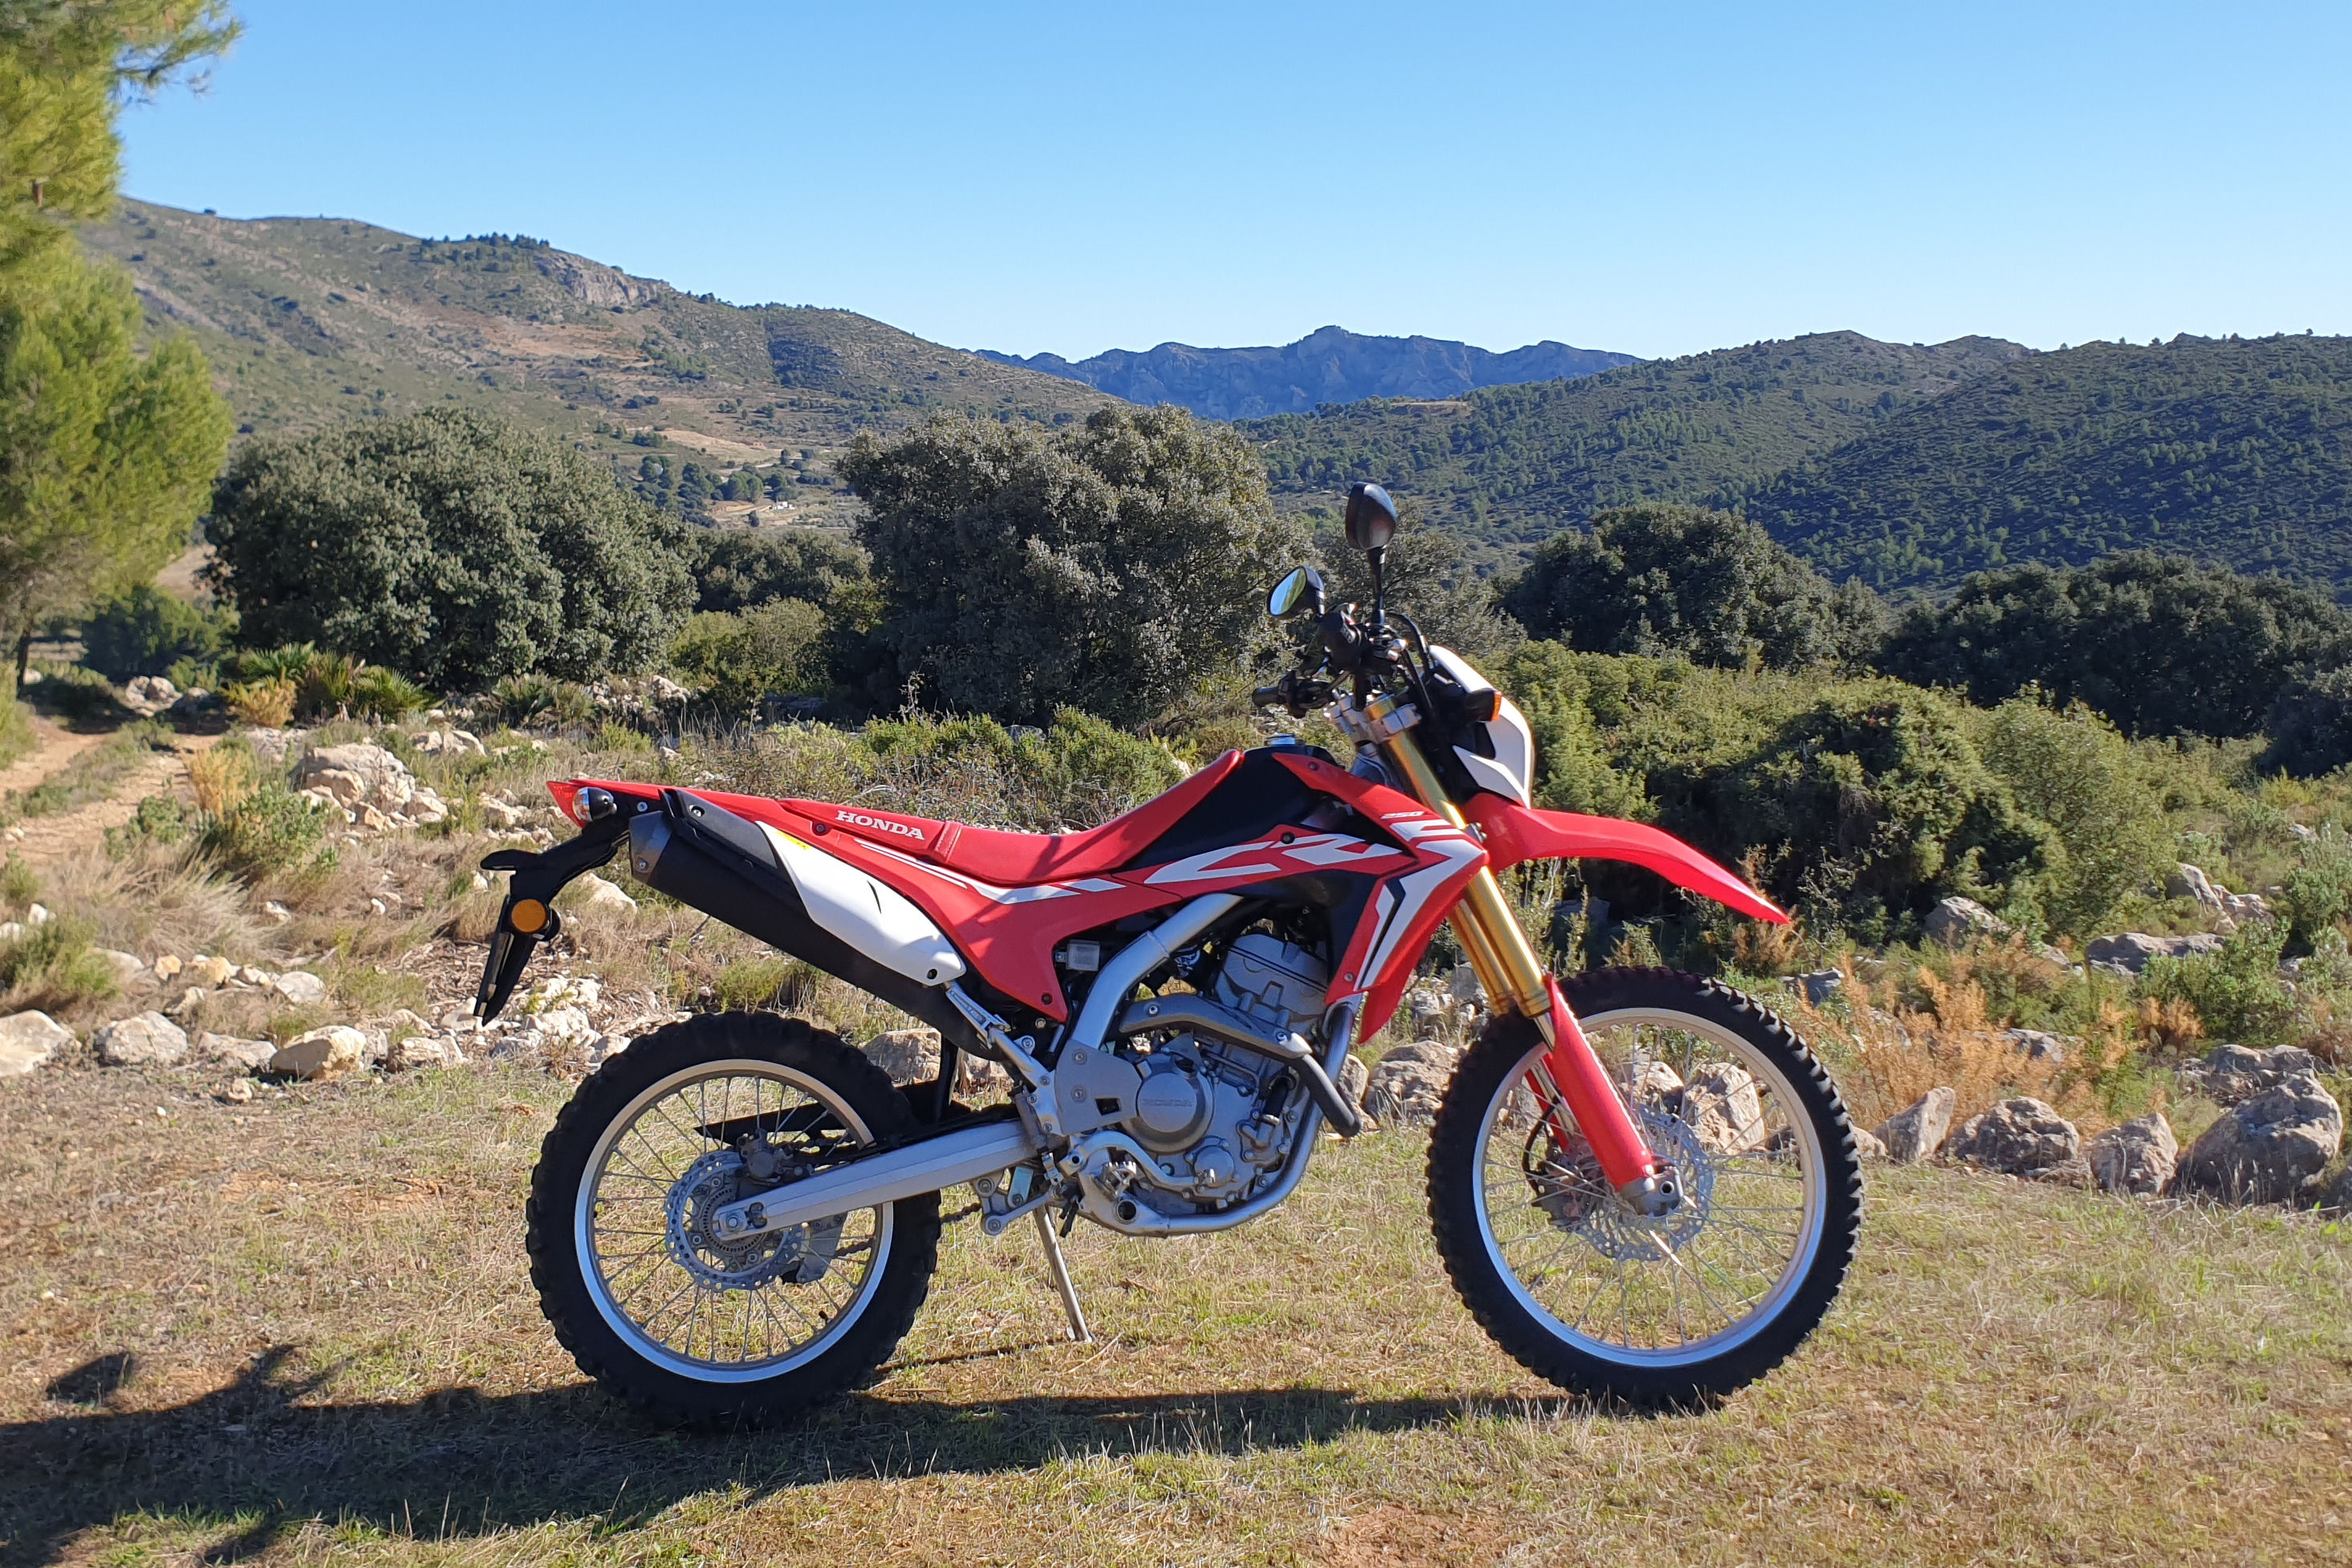 CRF 250 L in the Spanish countryside